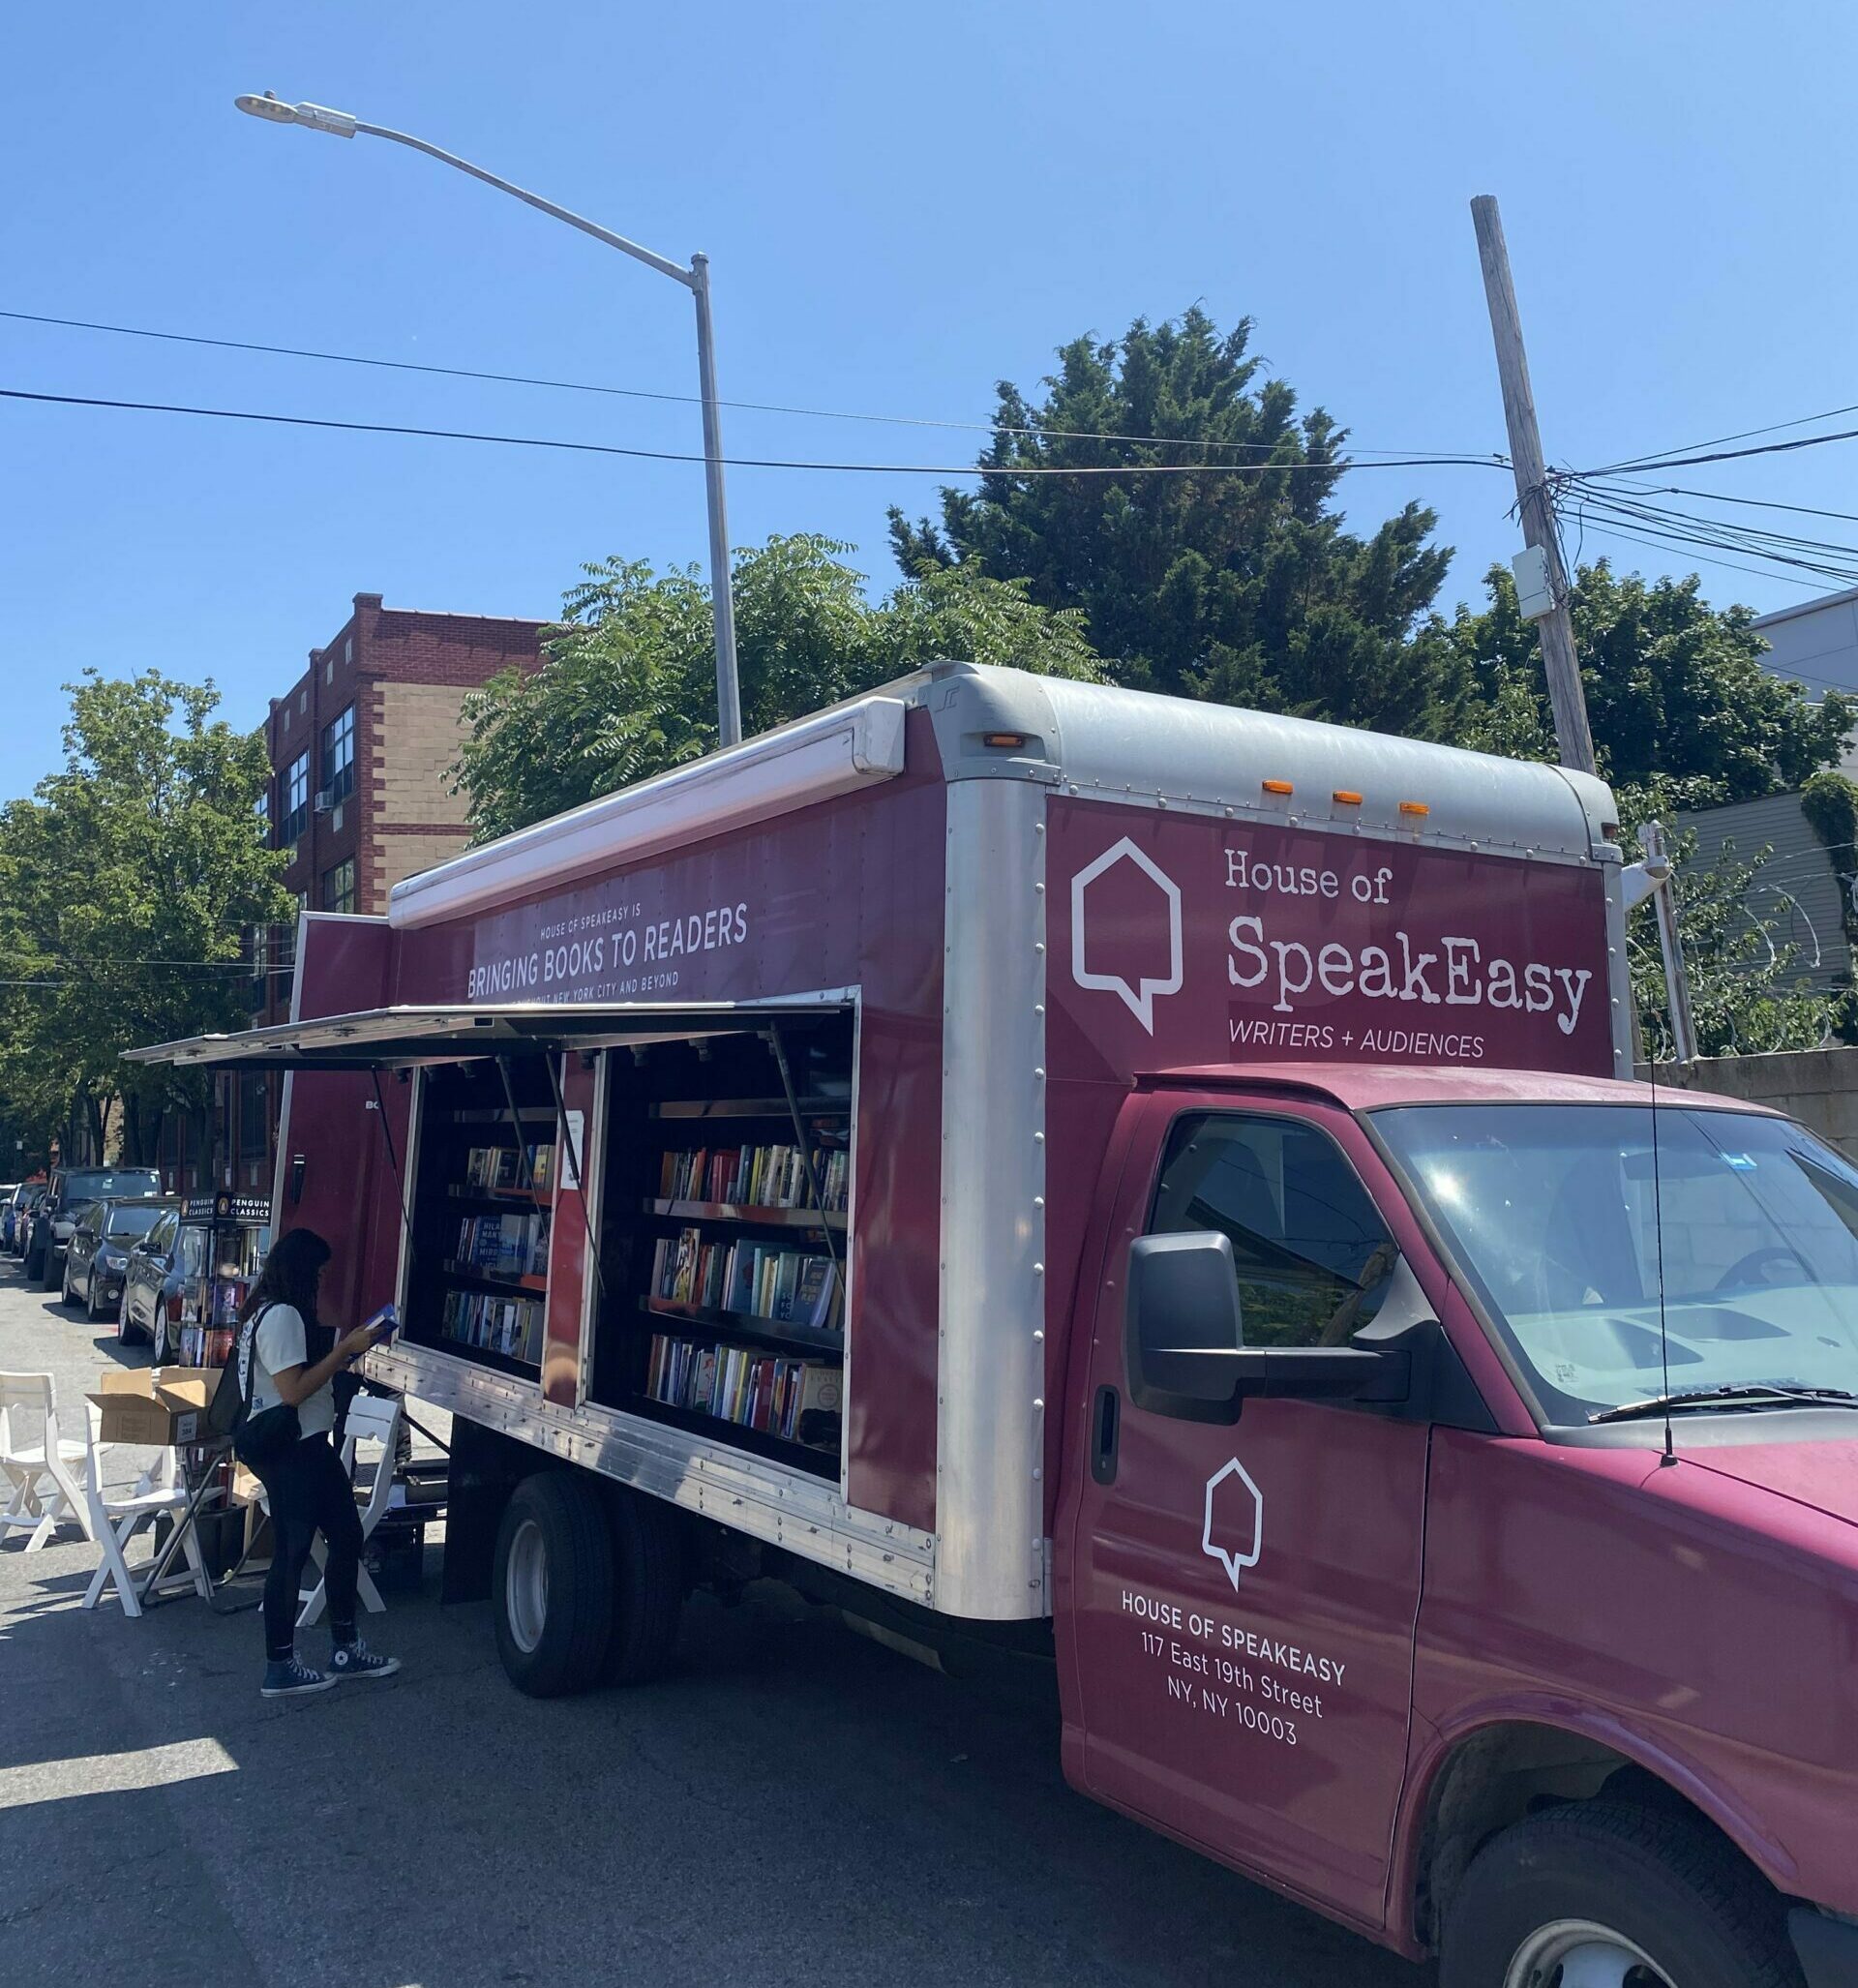 SpeakEasy's Bookmobile on a sunny, open street. Someone stands in the shade under the truck's awning, looking at the books on offer.